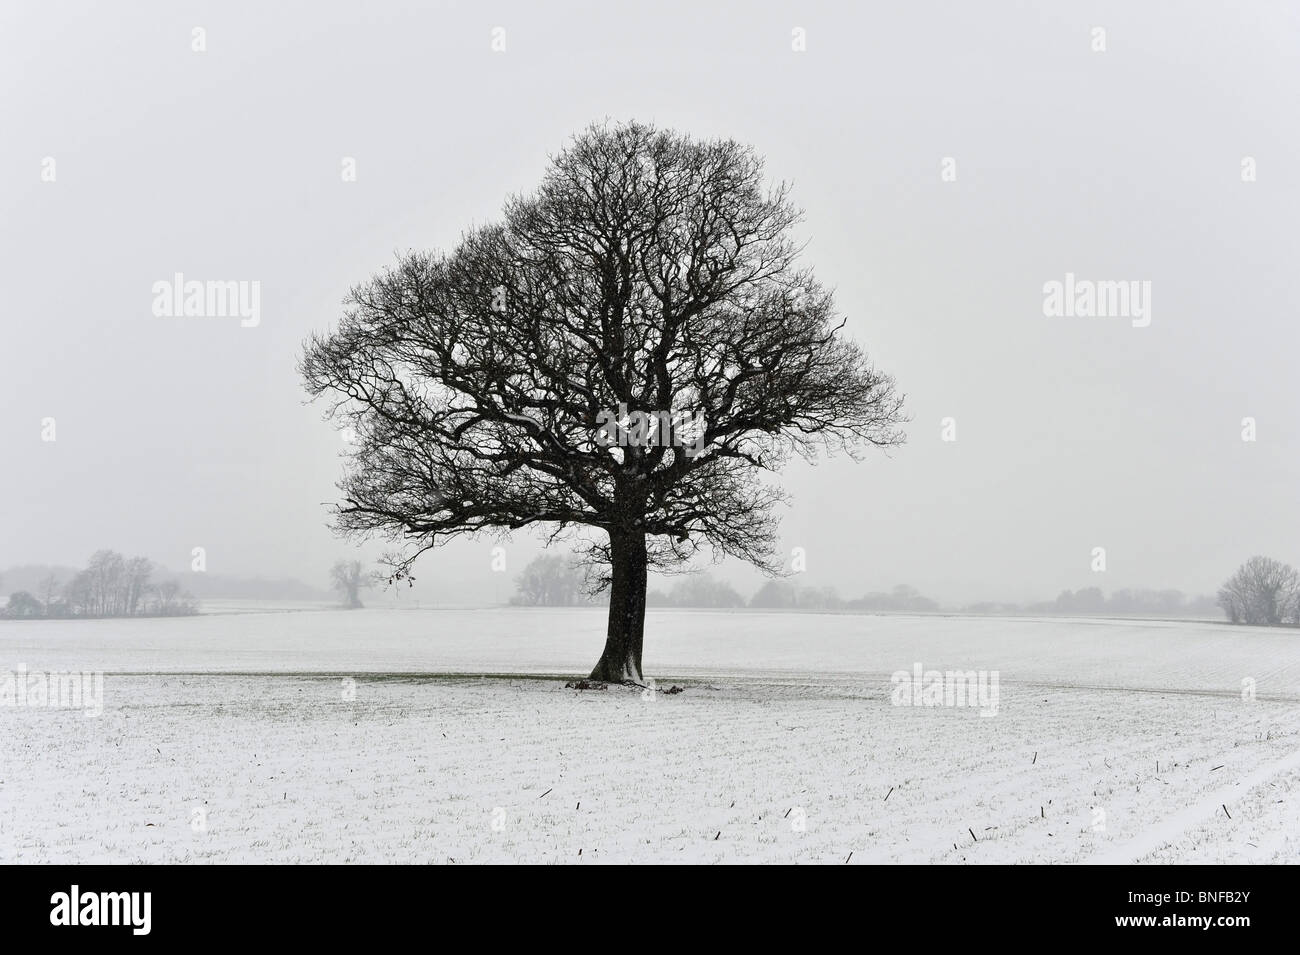 Image of a single oak tree standing in the centre of a field during a snow storm Stock Photo